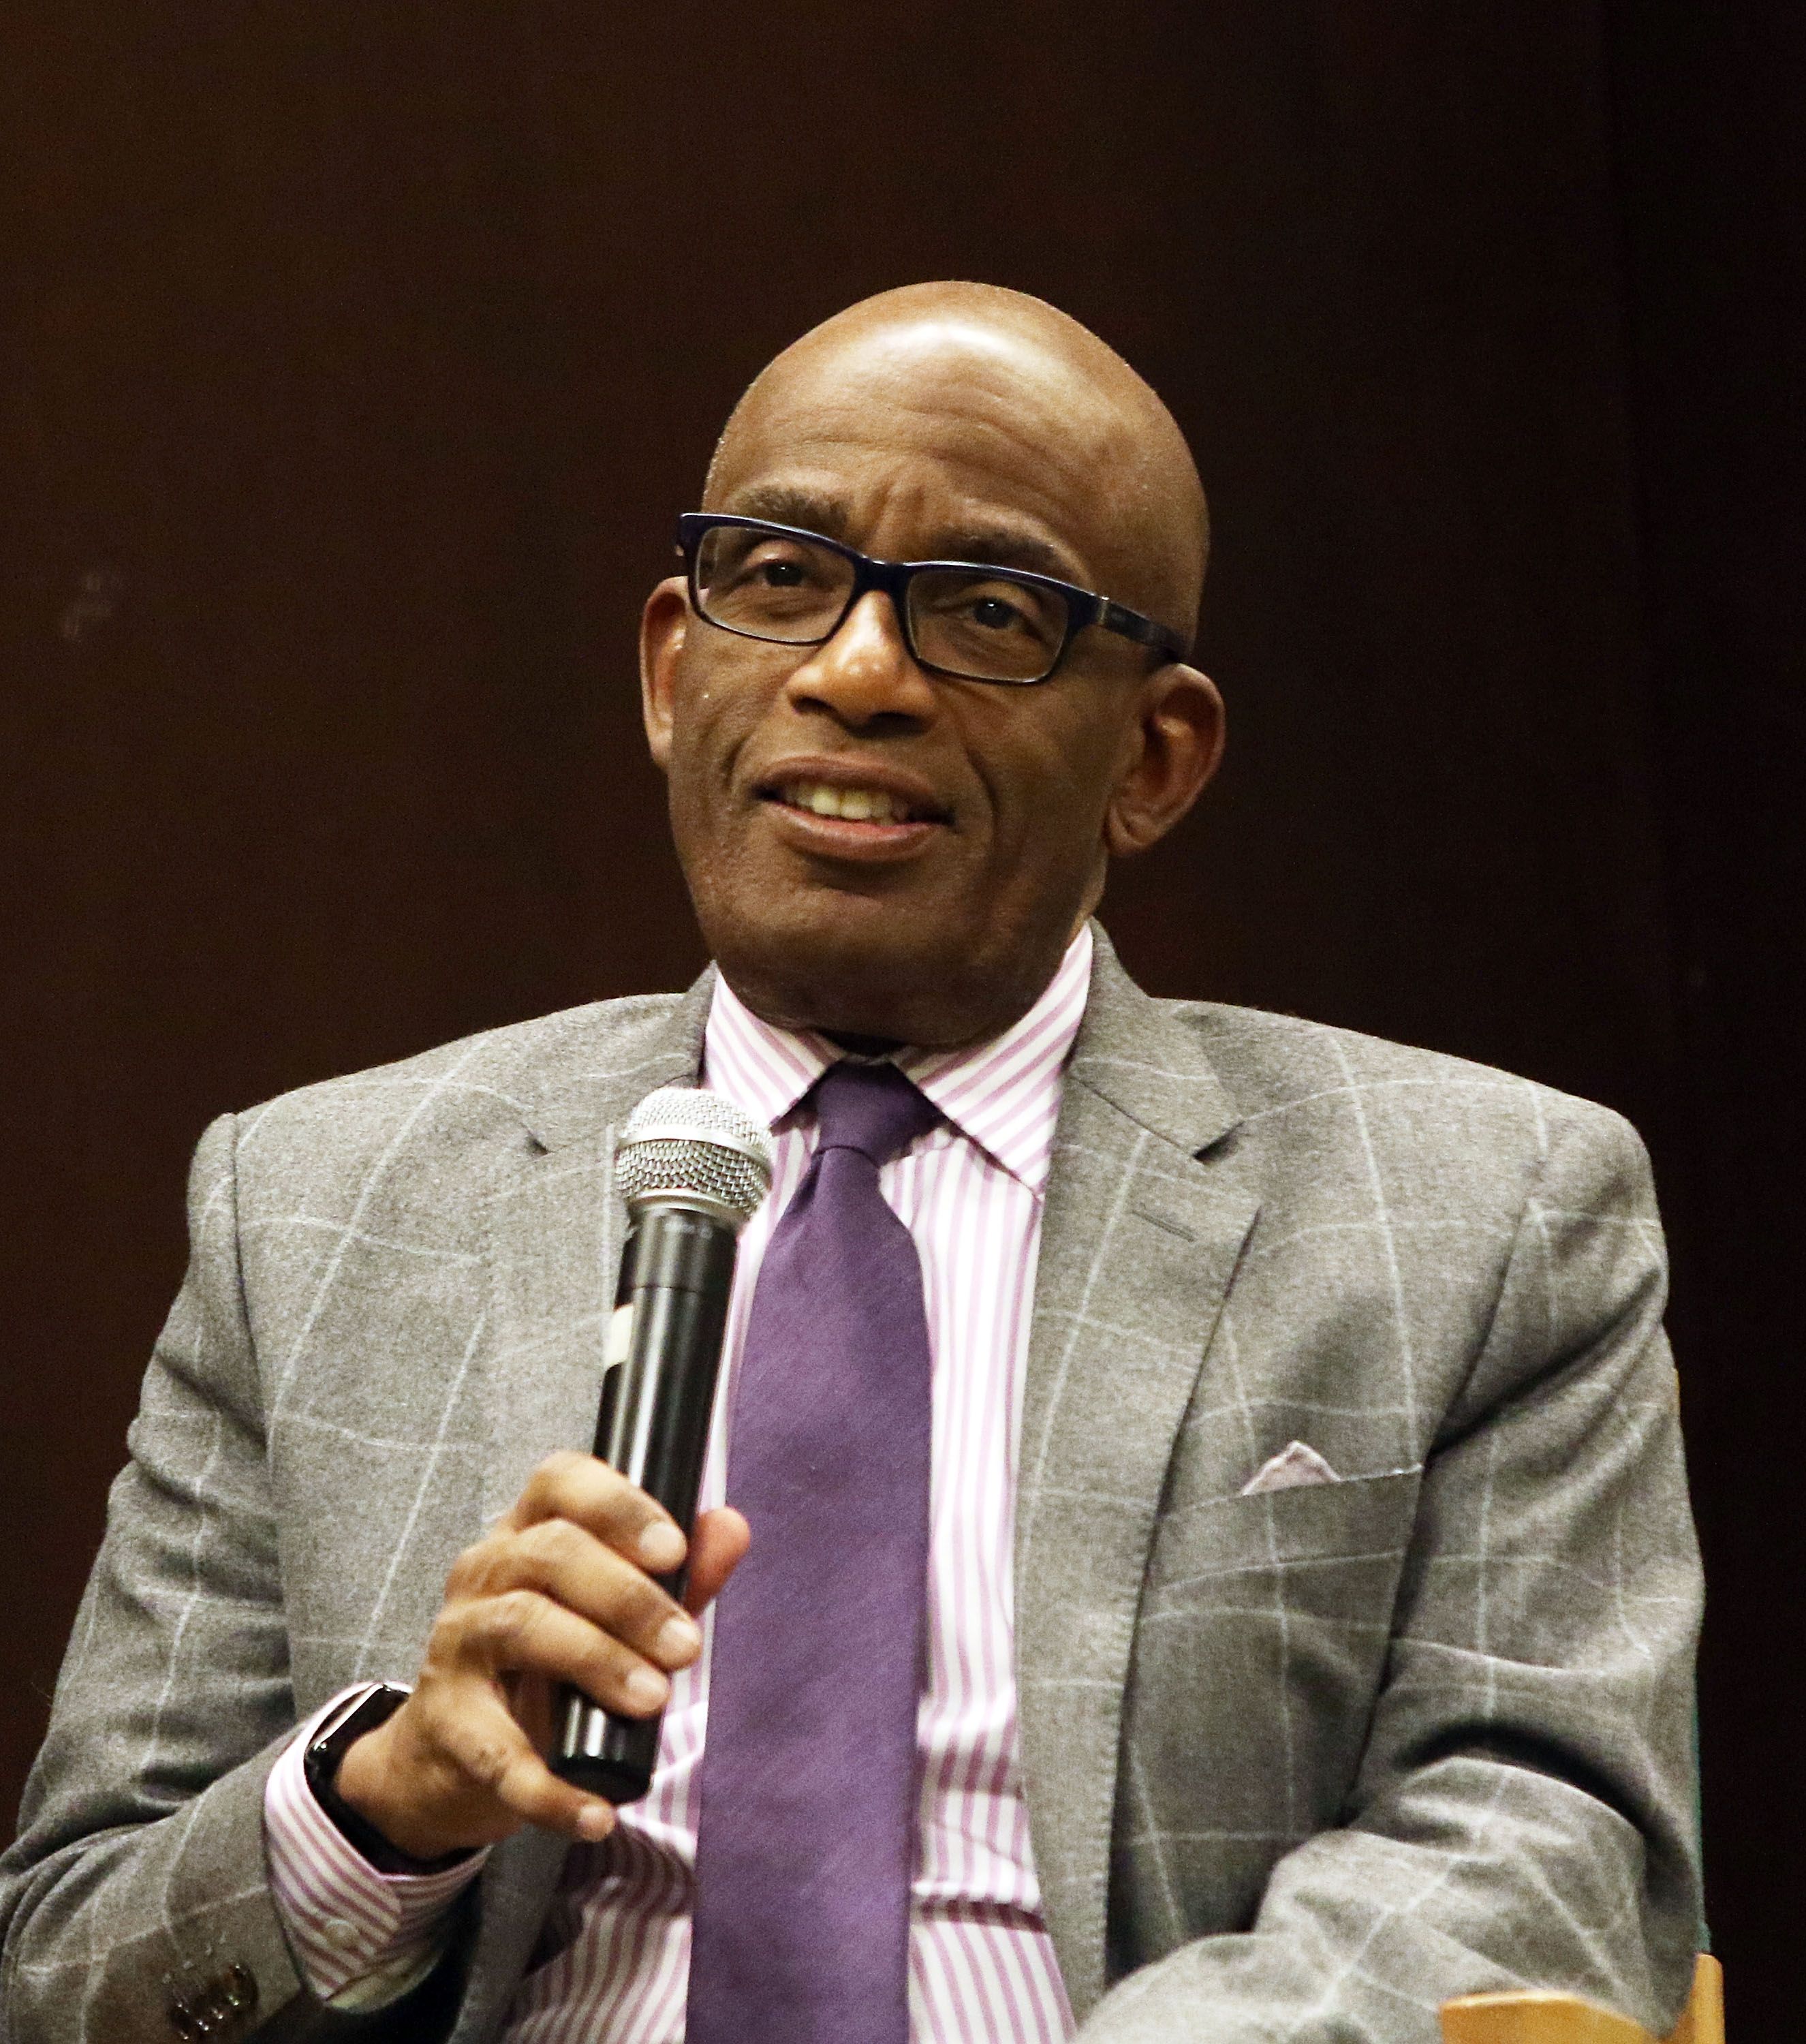 Al Roker promotes his book at Barnes & Noble 82nd Street on January 7, 2016 | Photo: Getty Images